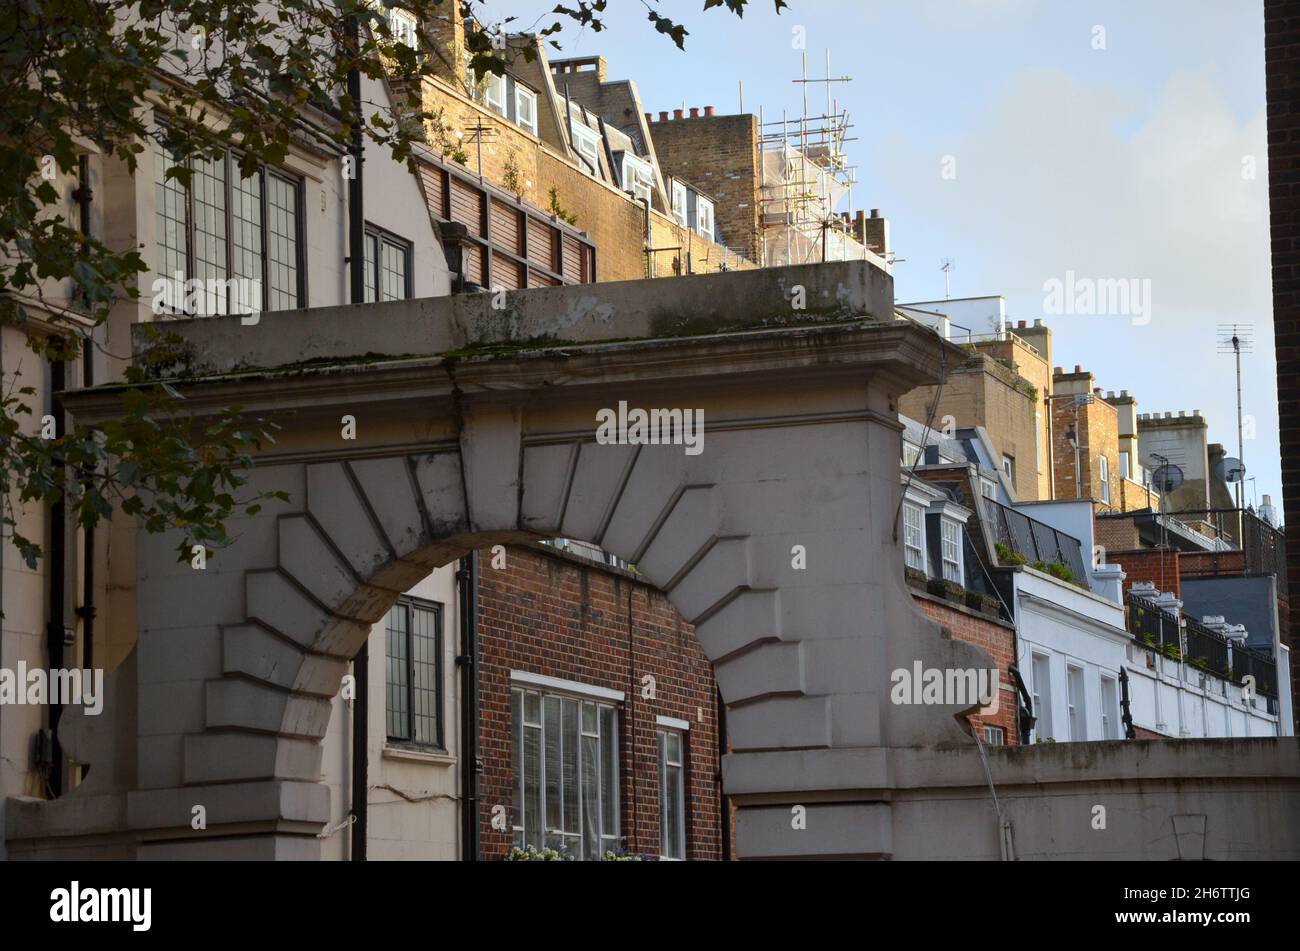 Some photos taken on an afternoon stroll through the lovely borough of Kensington and Chelsea, during the Fall, in London. Stock Photo